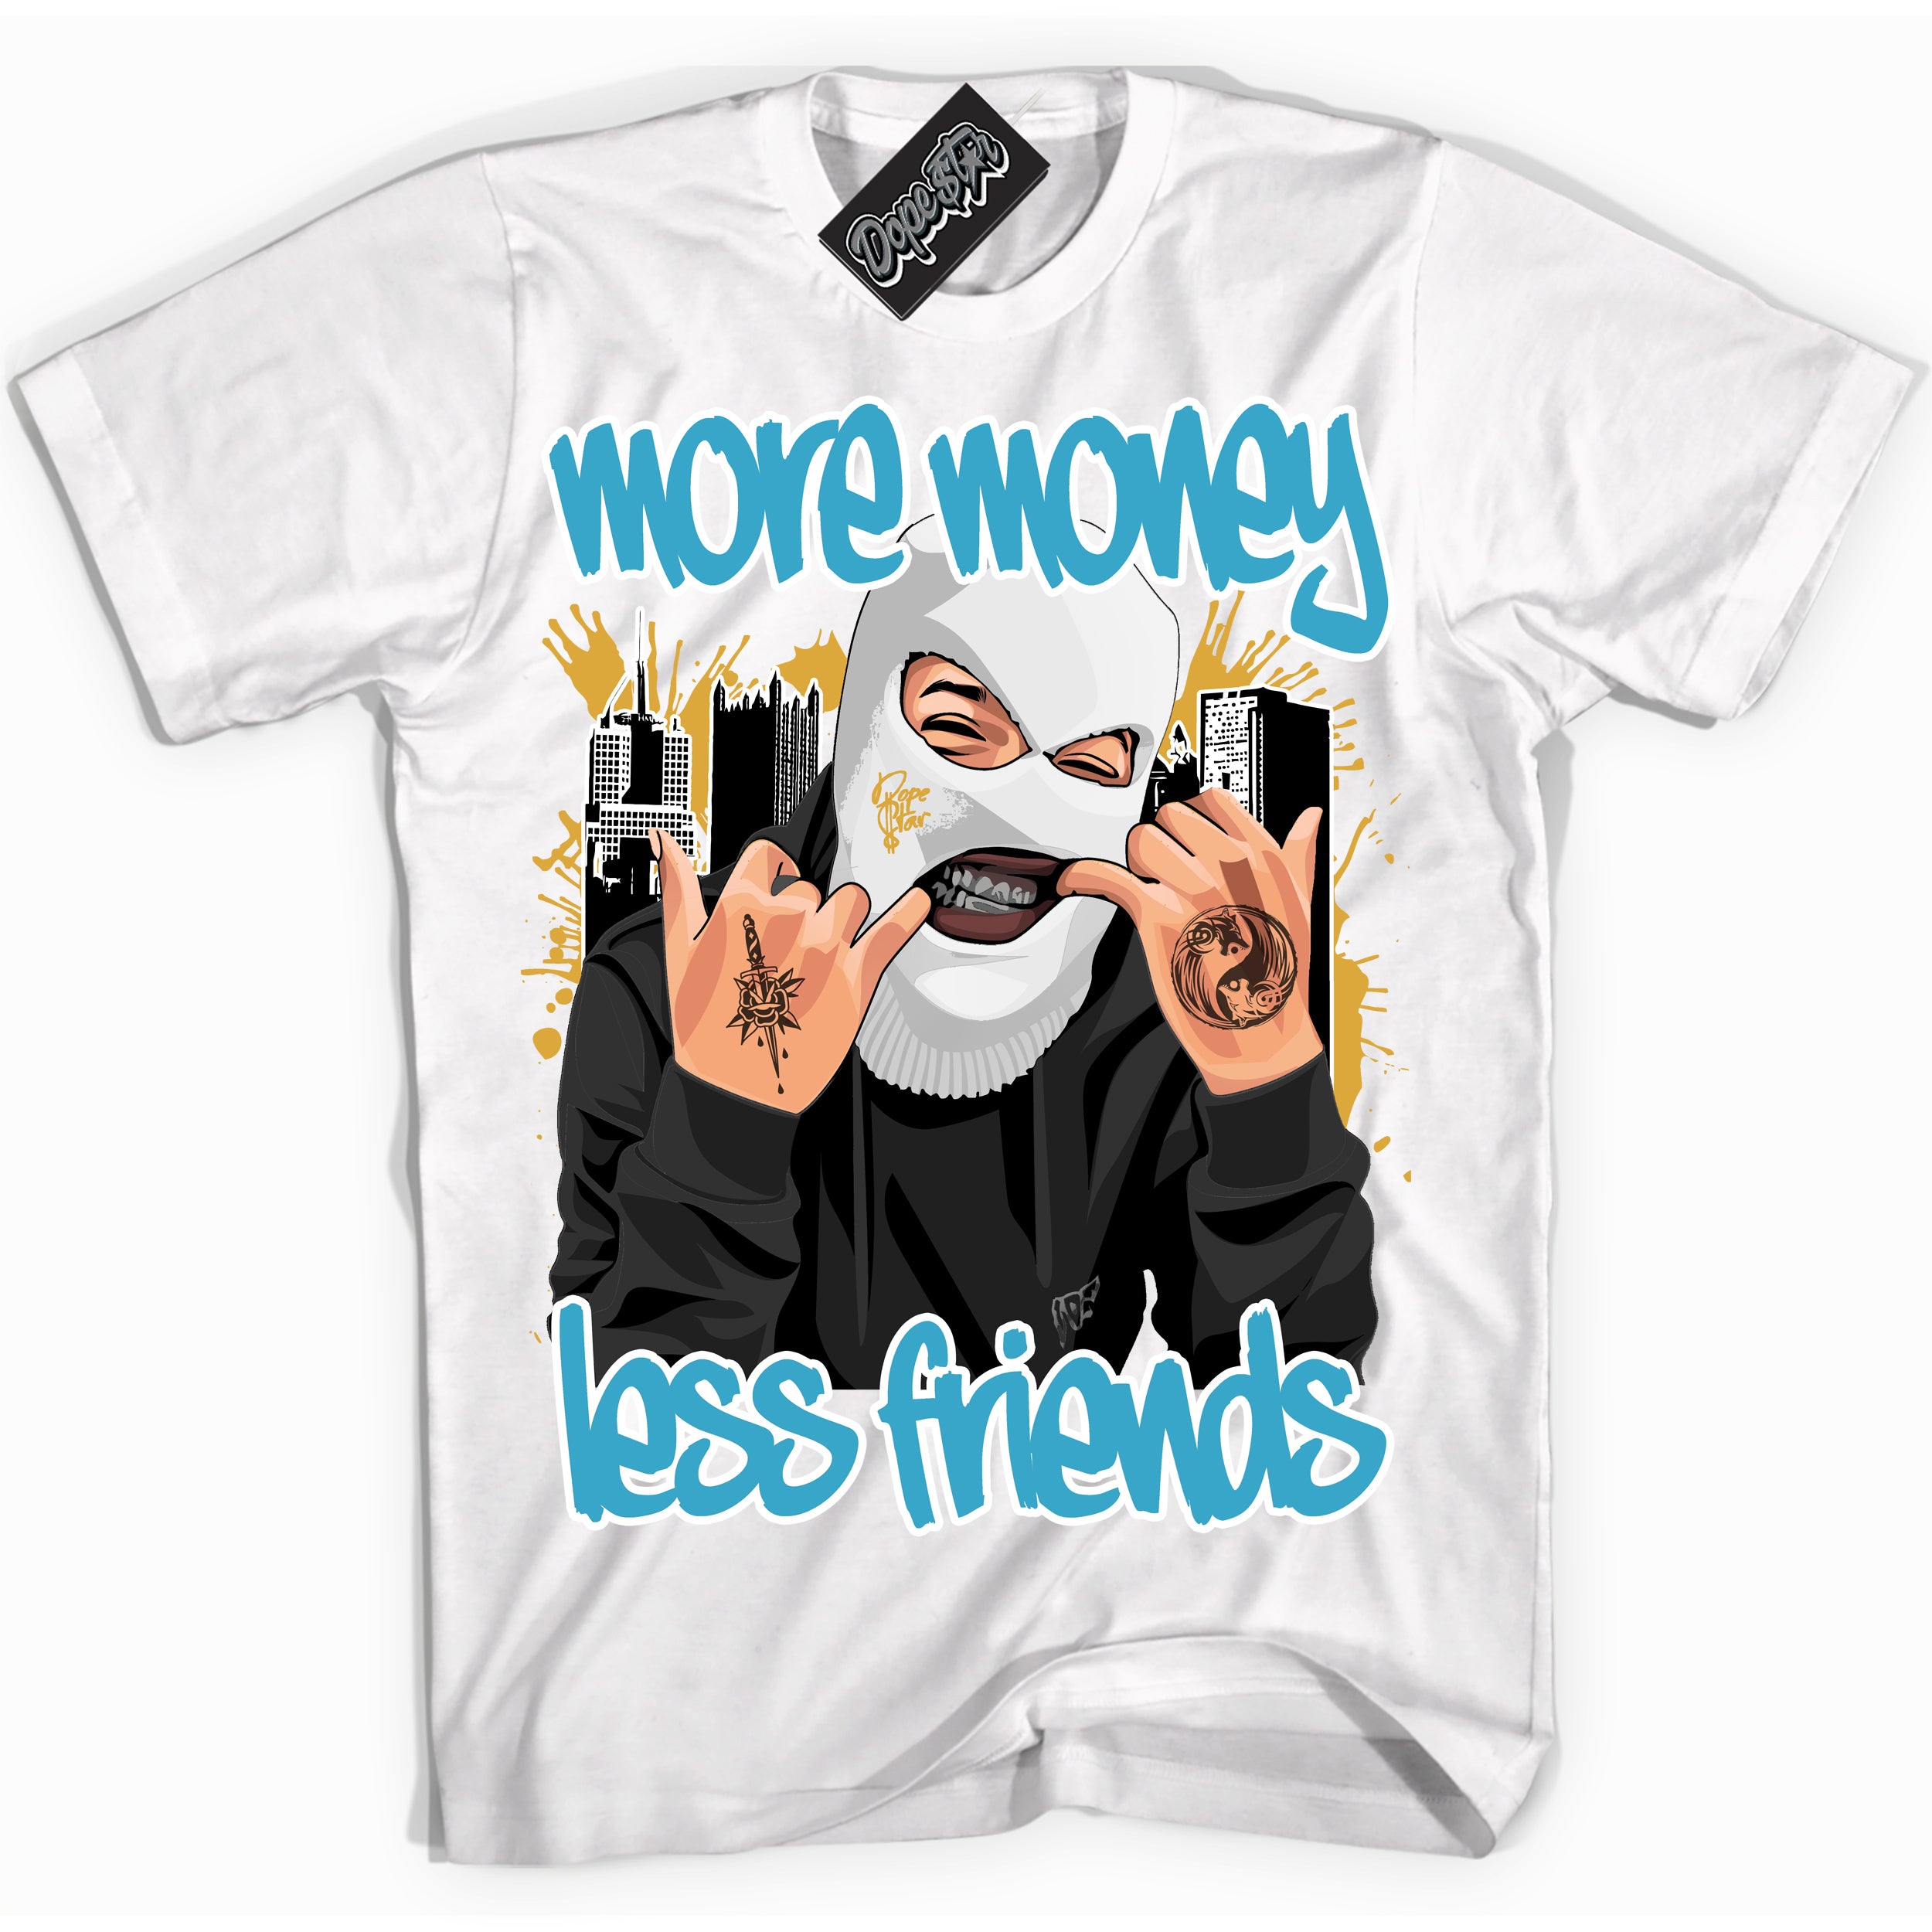 Cool White Shirt with “ More Money Less Friends” design that perfectly matches Aqua 5s Sneakers.